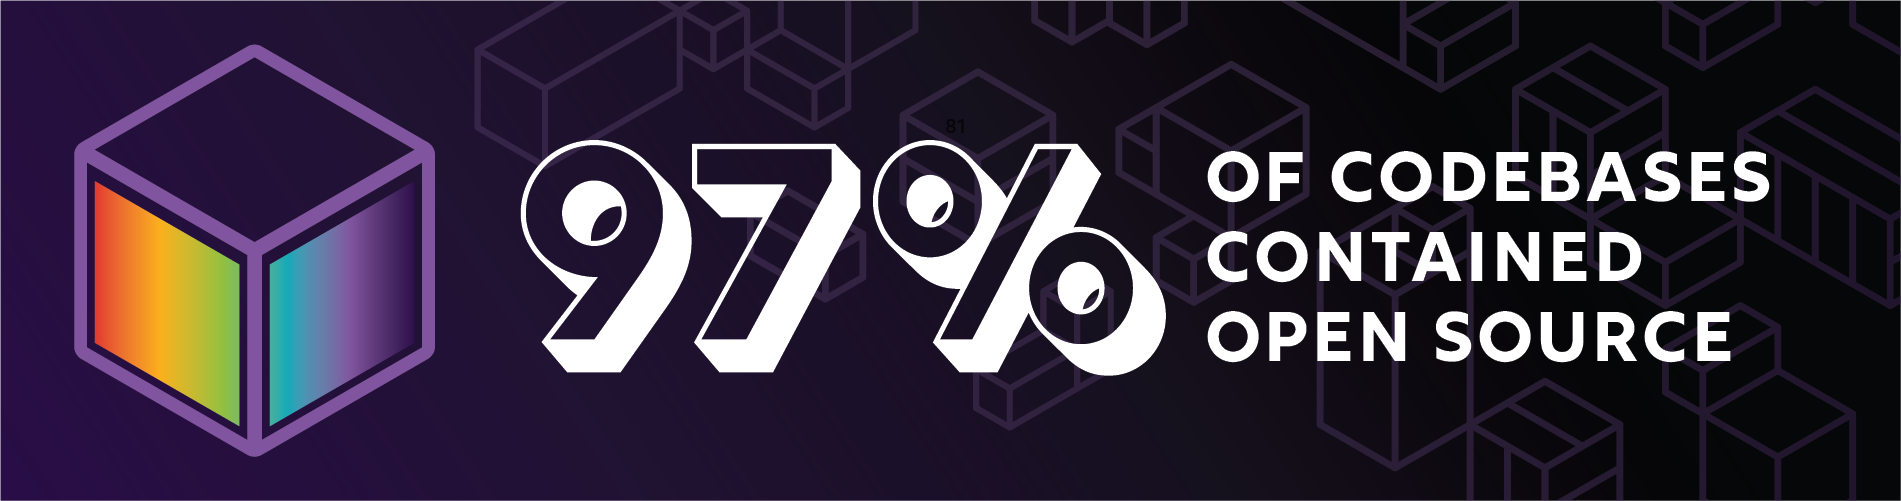 97% of codebases contained open source | Synopsys